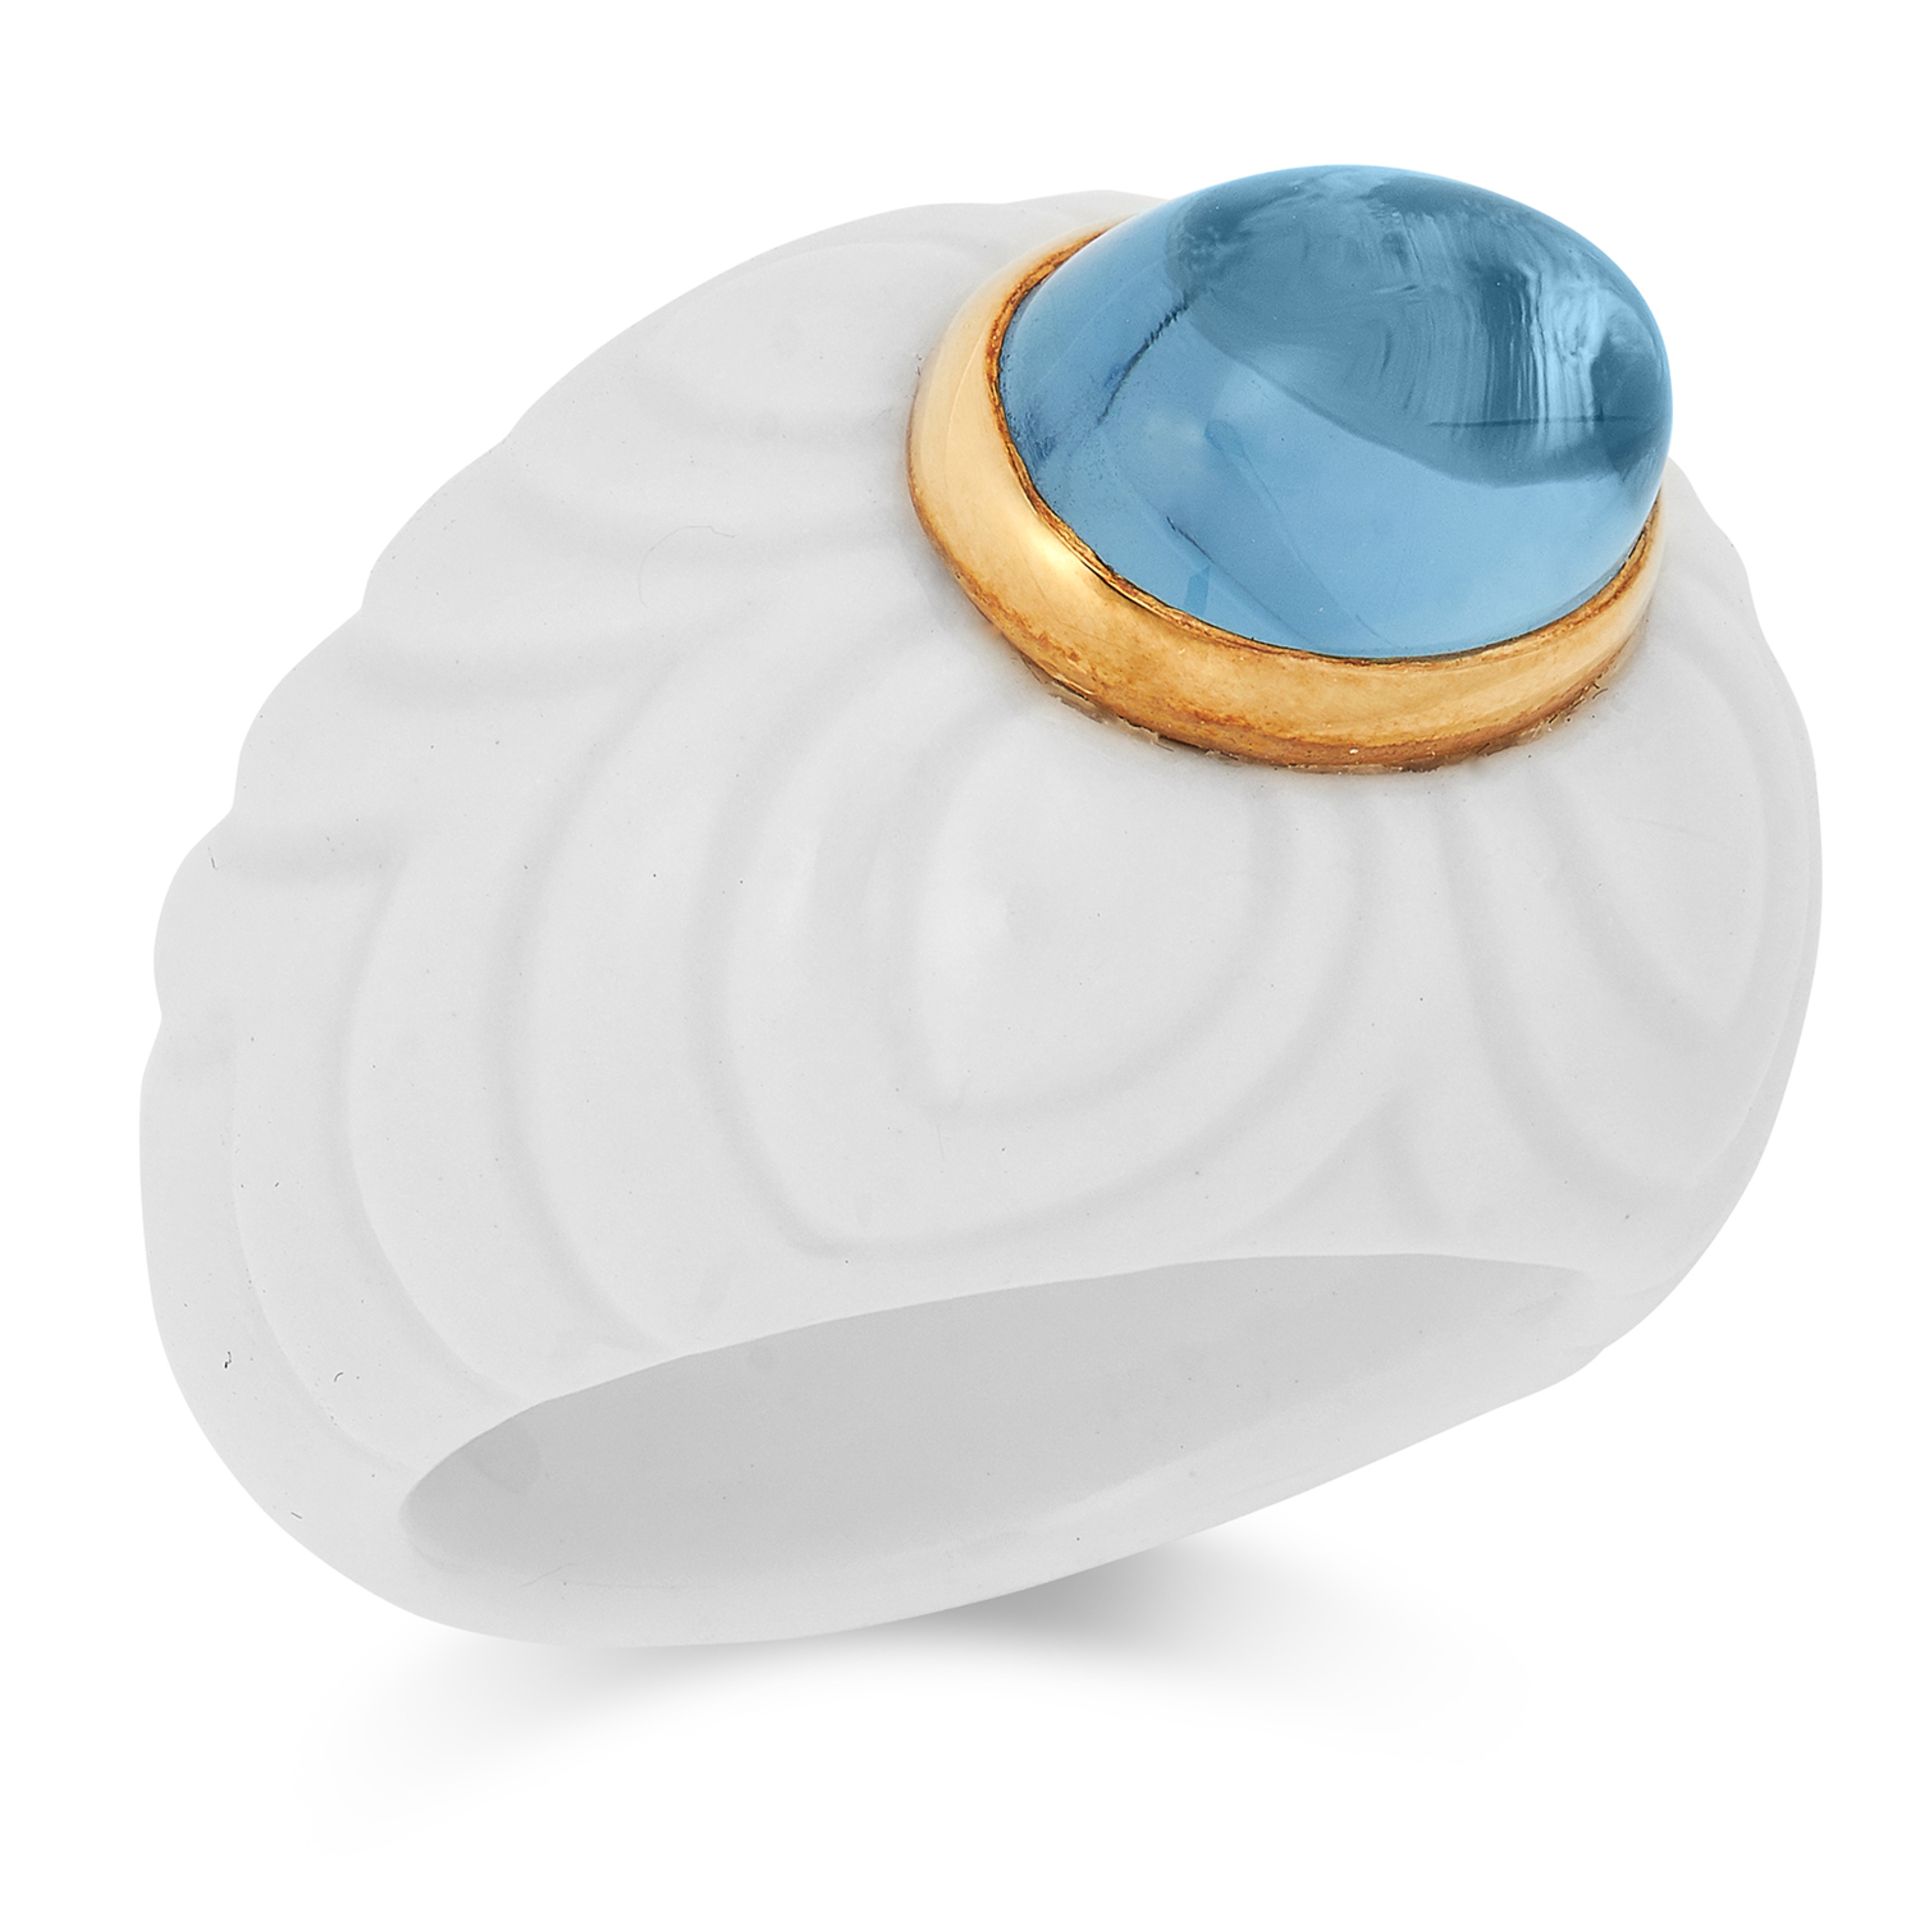 A BLUE TOPAZ CHANDRA RING, BULGARI with a cabochon topaz on a ceramic band, signed Bvlgari, size L /